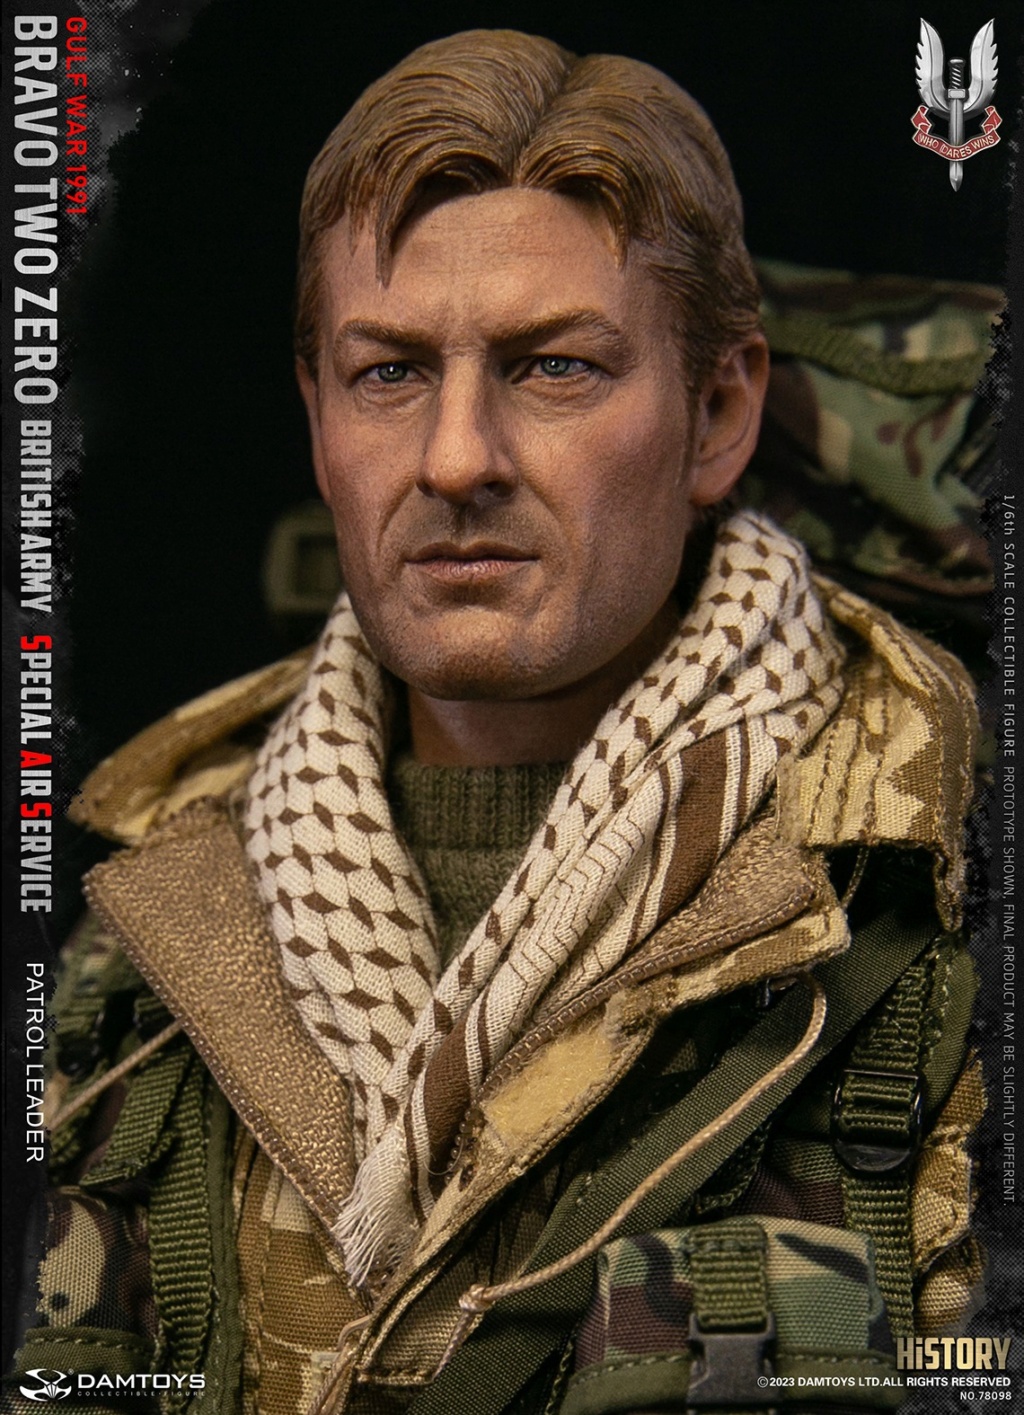 newproduct - NEW PRODUCT: DAM Toys: 1/6 scale BRITISH ARMY SPECIAL AIR SERVICE (SAS) PATROL LEADER 10593010